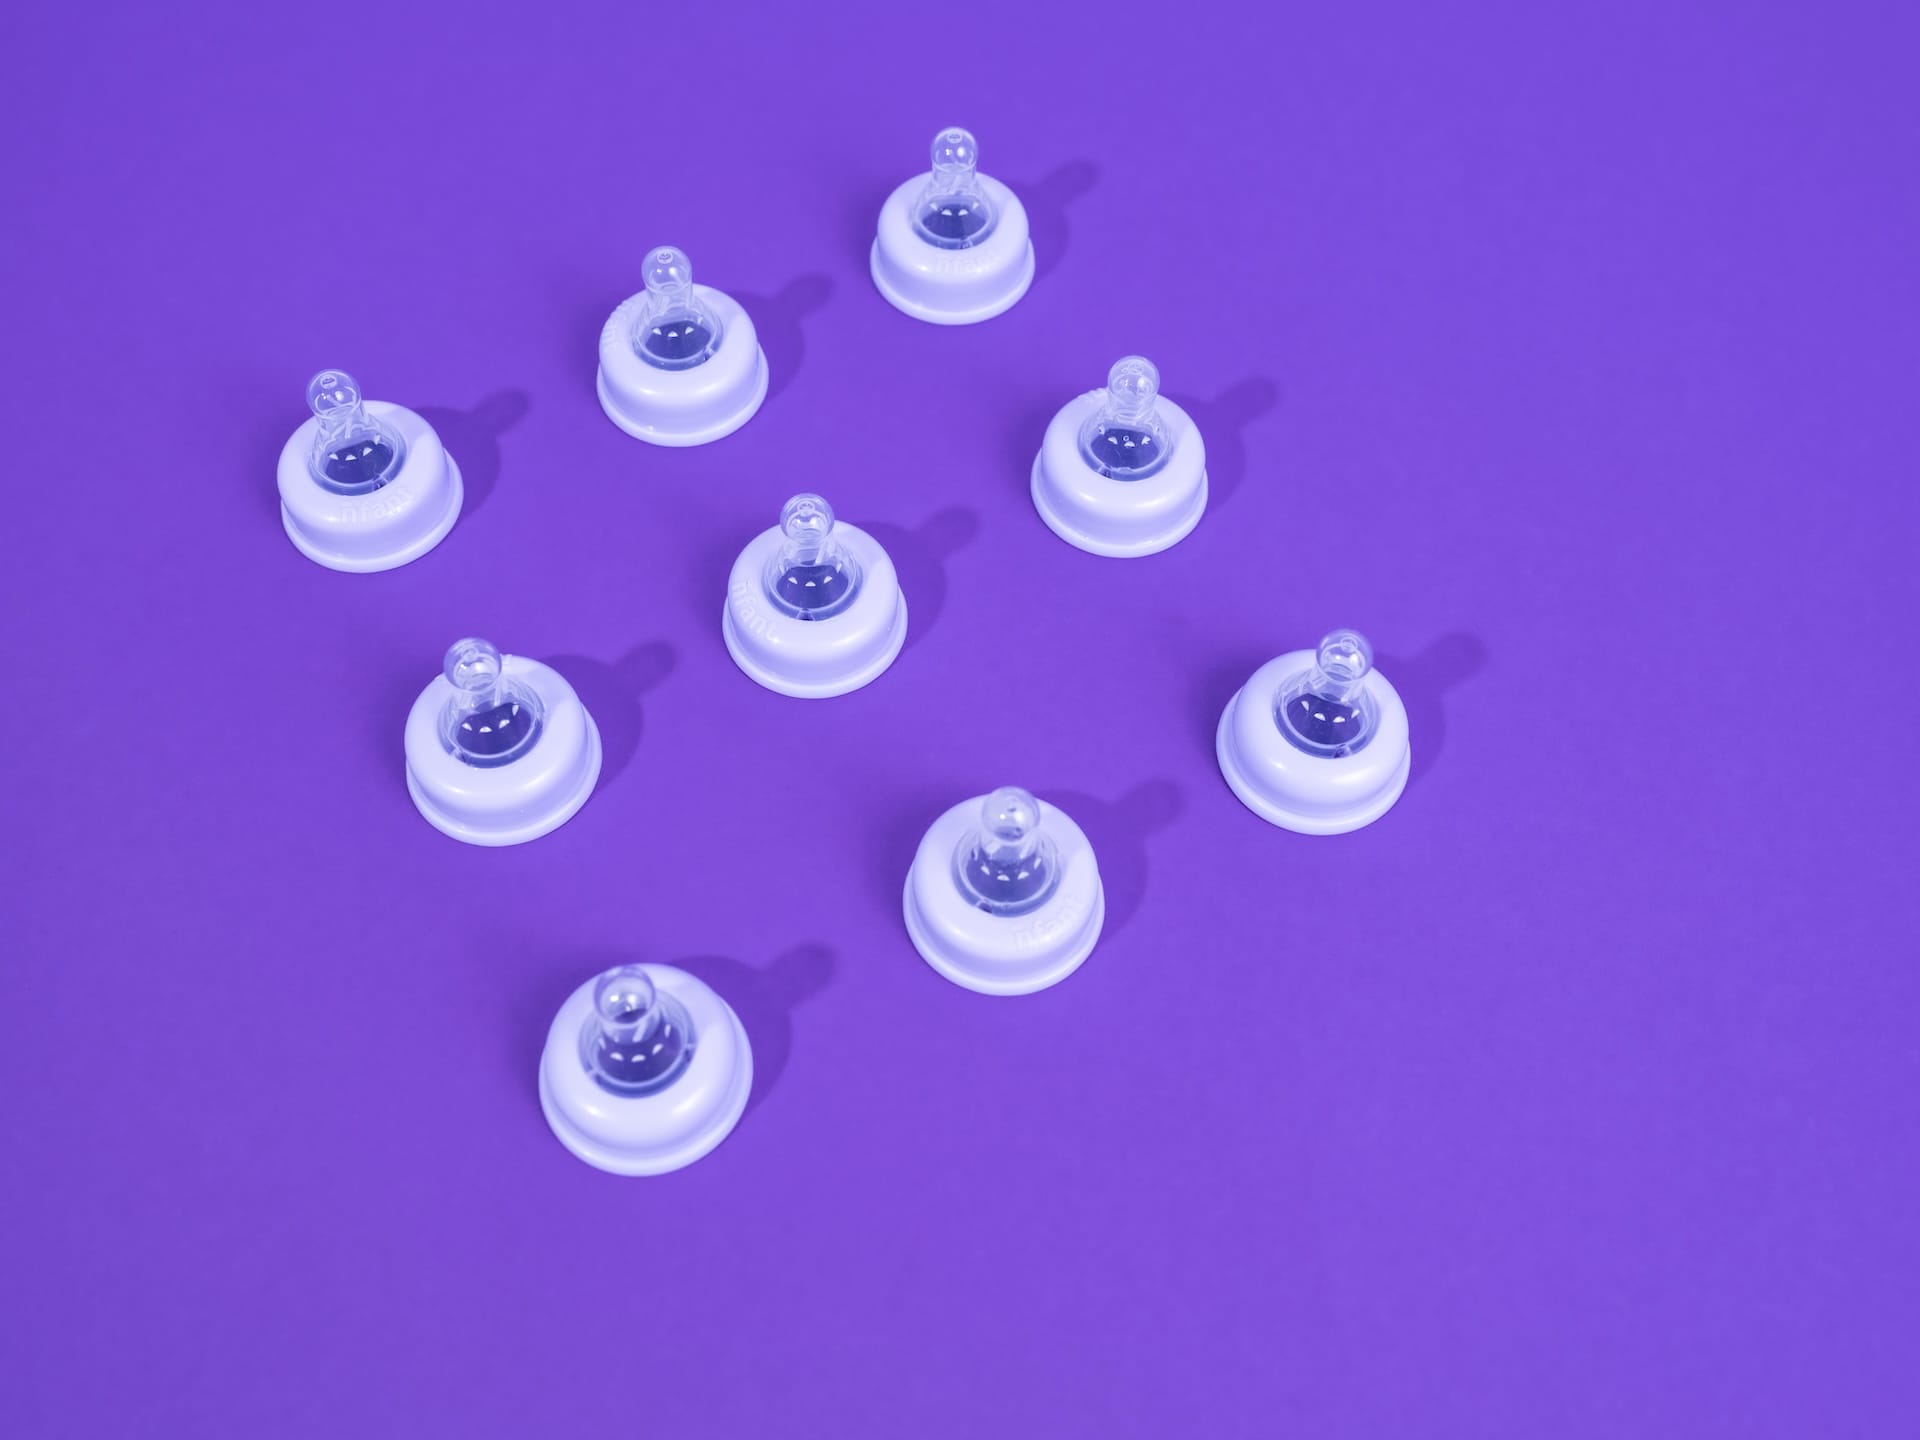 9 matching baby bottle nipples viewed from above on a purple background.